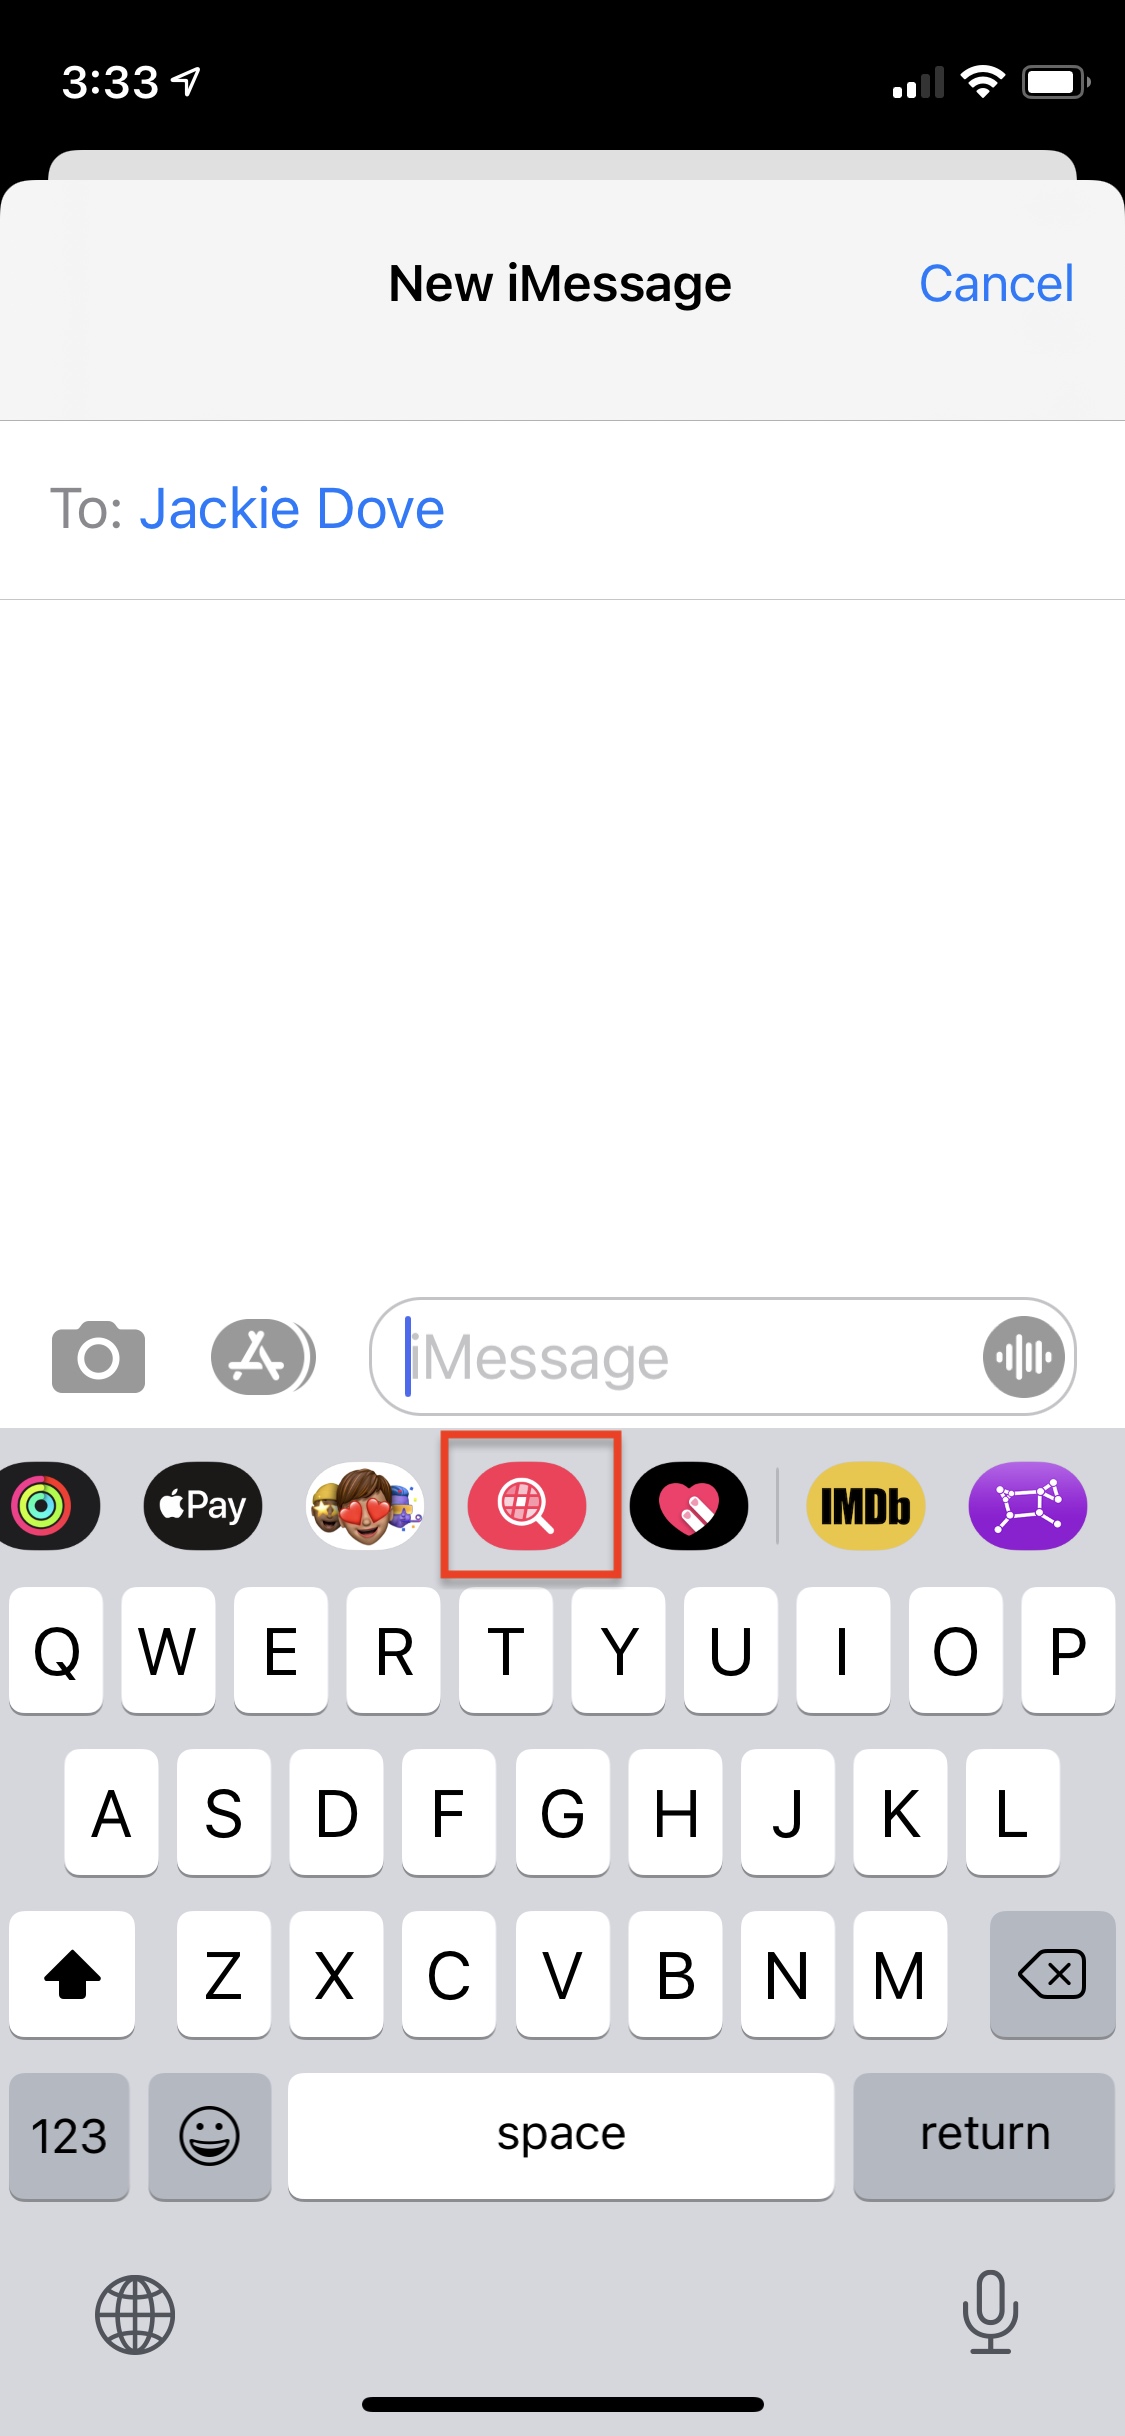 How to make an animated GIF on your iPhone